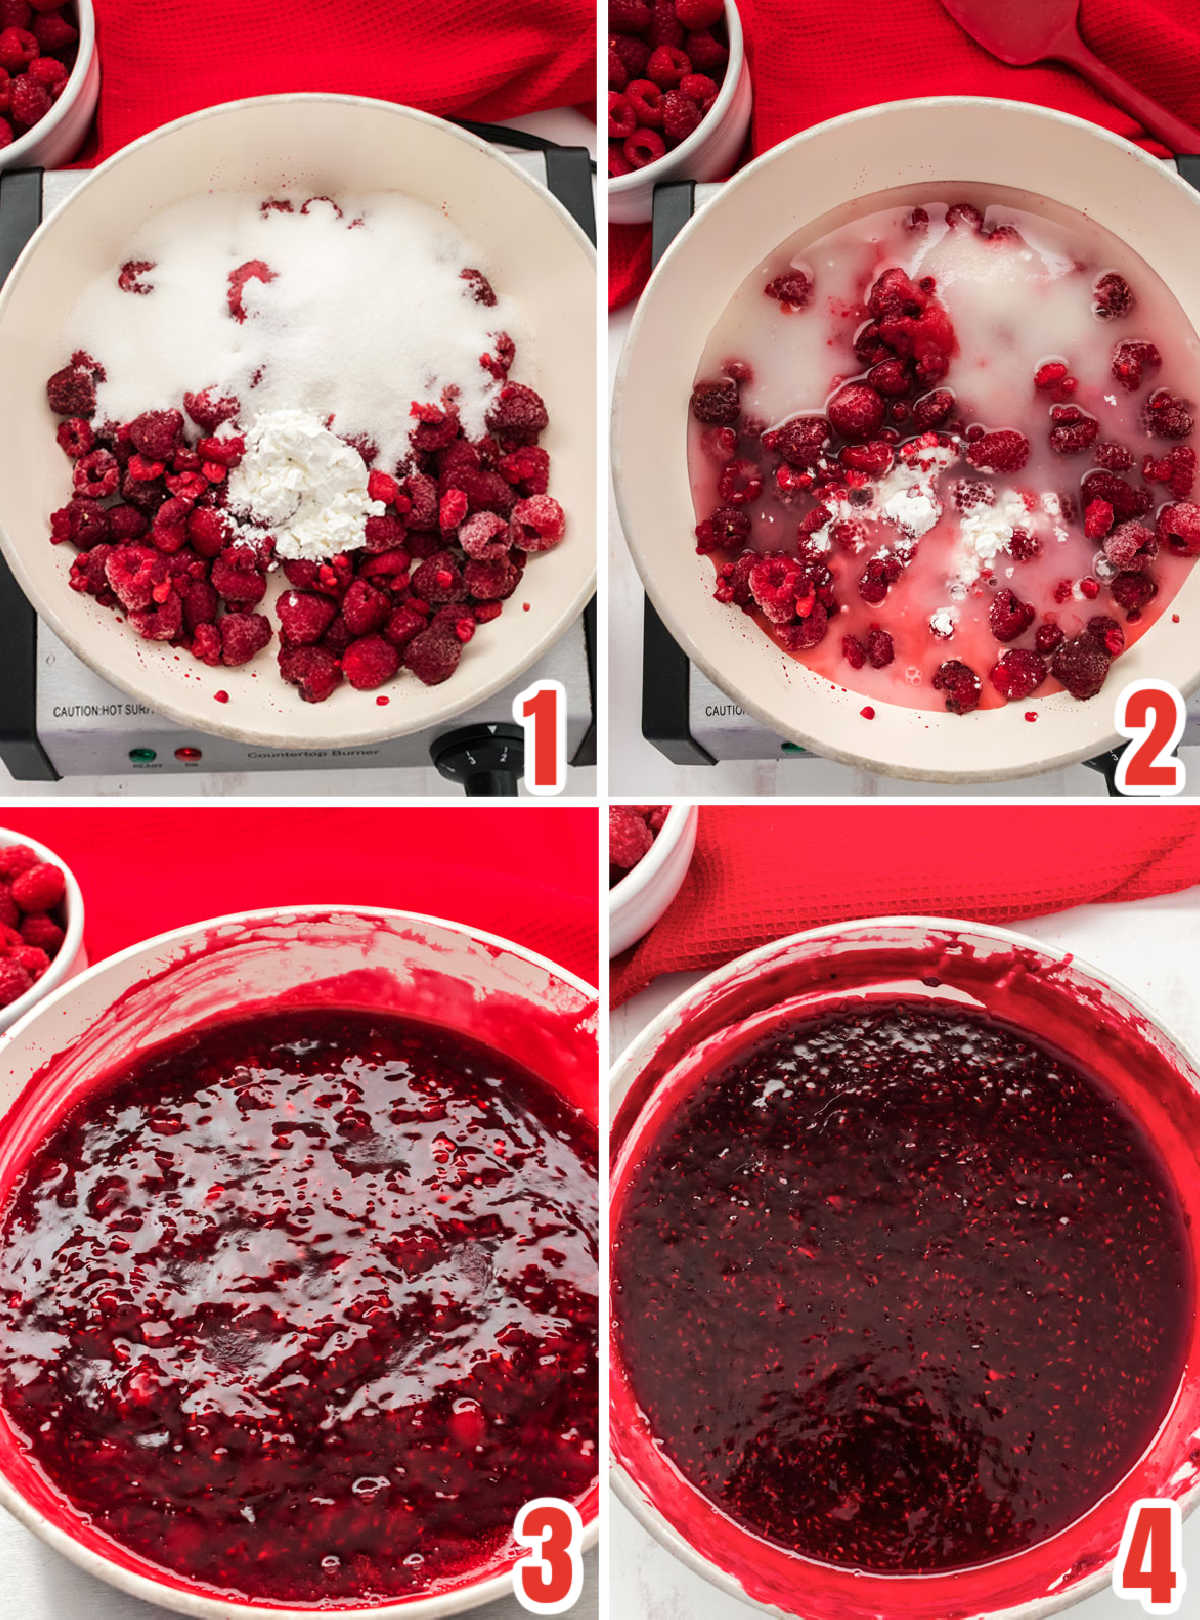 Collage image showing how to make Raspberry Curd.